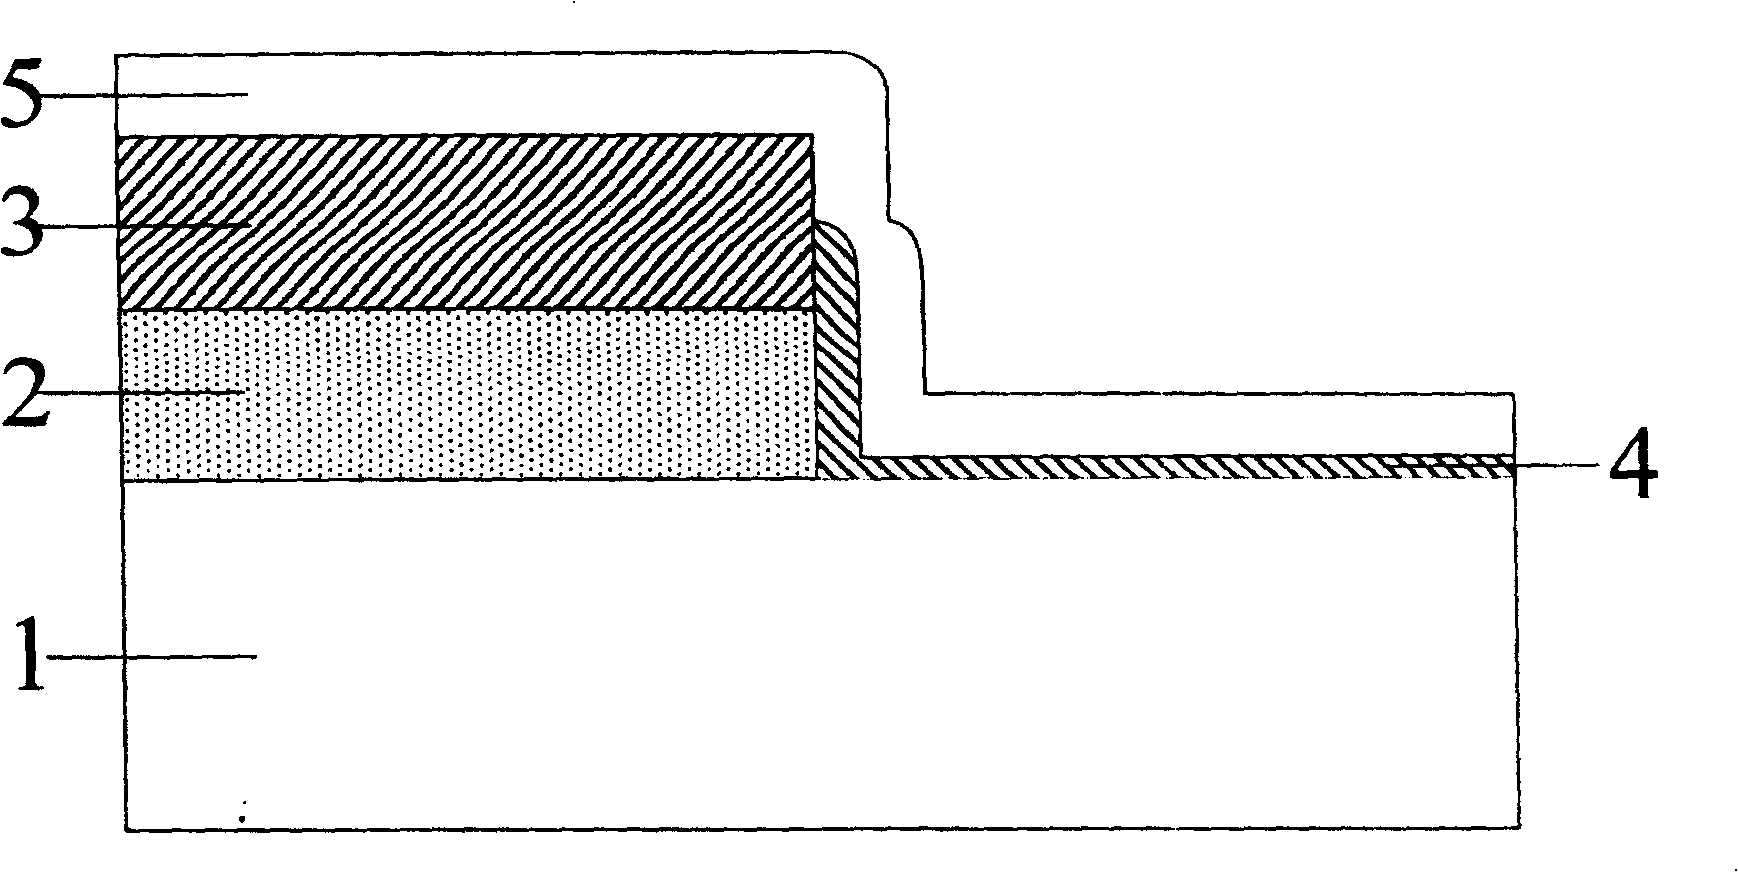 A MOS resistor and its manufacture method